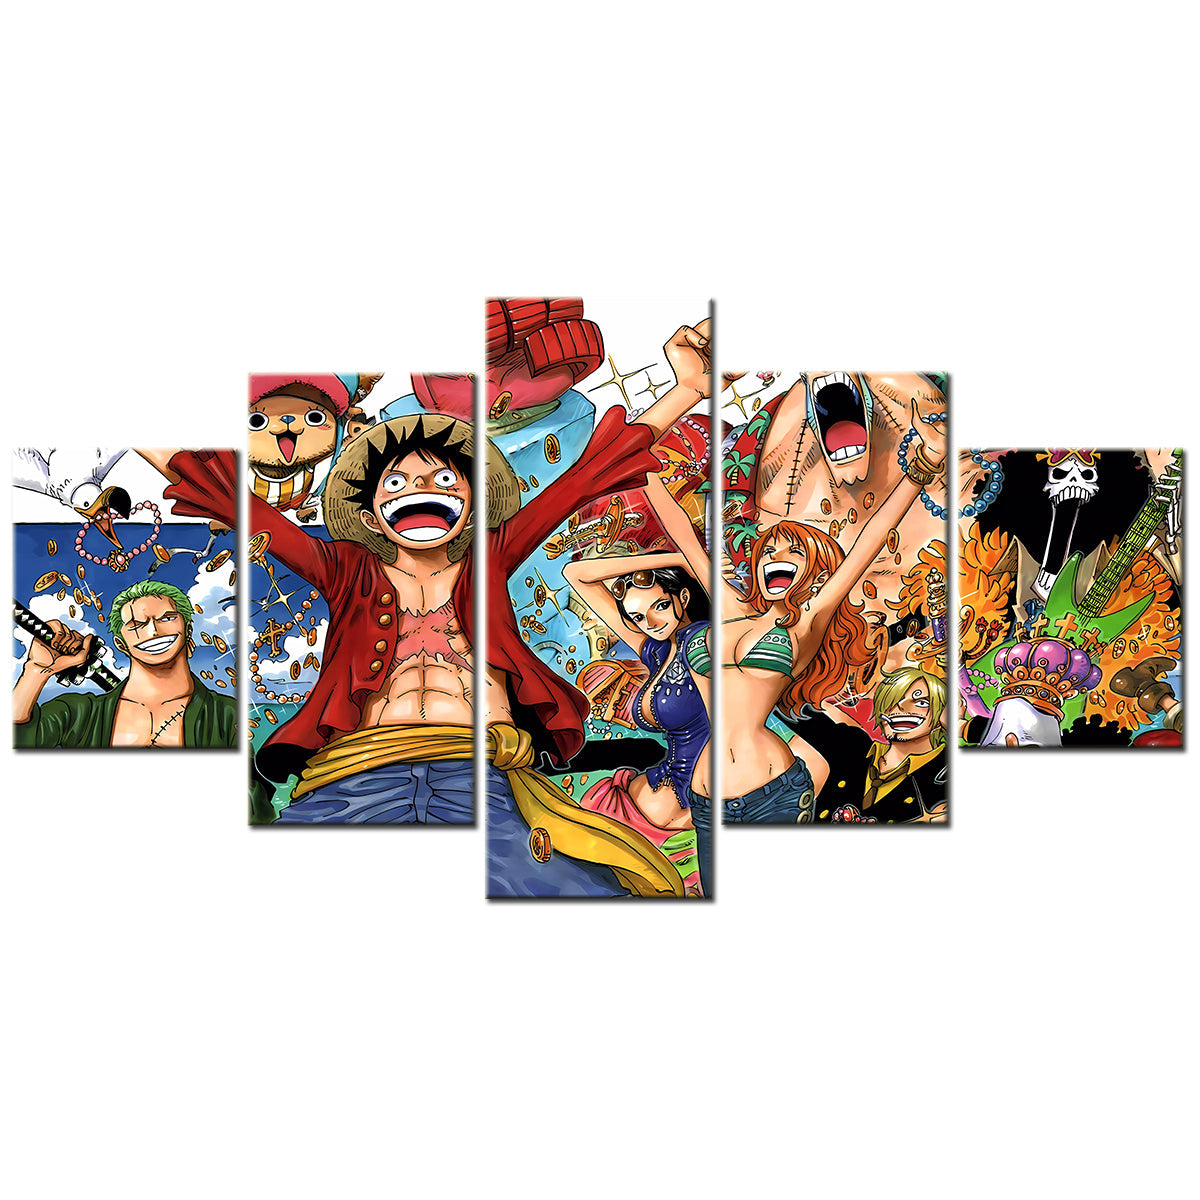 One Piece - 5 Pieces Wall Art - Monkey D. Luffy - Roronoa Zoro - Nami - Nico Robin - Printed Wall Pictures Home Decor - One Piece Poster - One Piece Canvas